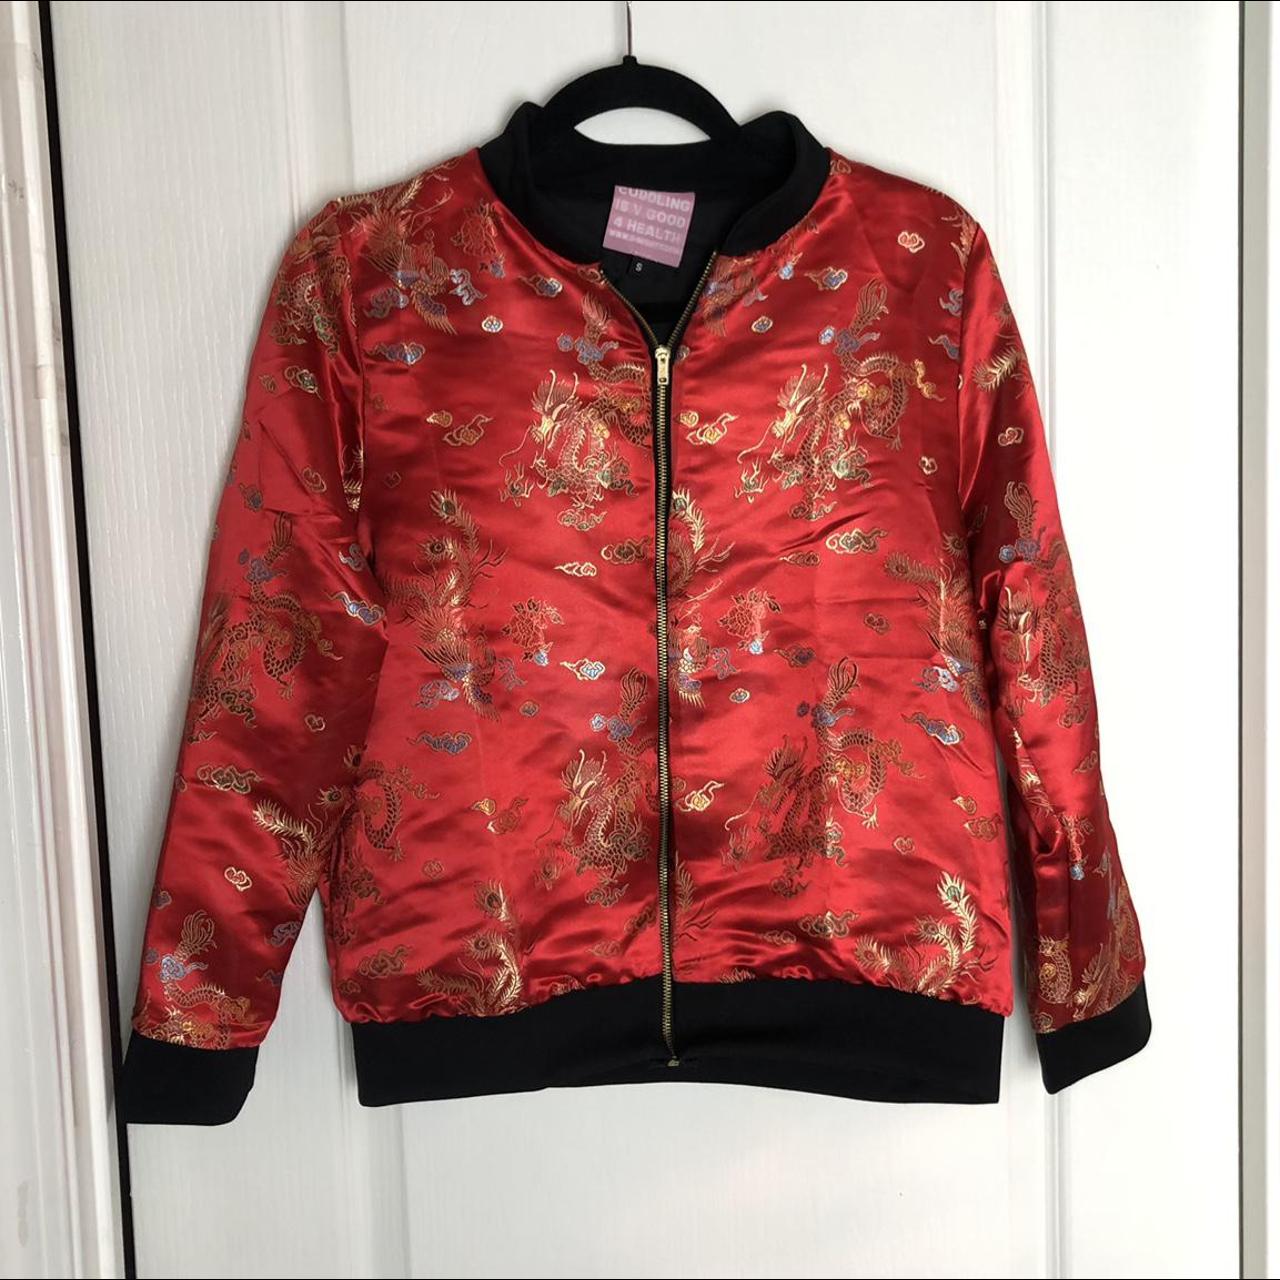 Omighty dragon bomber jacket! Never worn! #omighty... - Depop